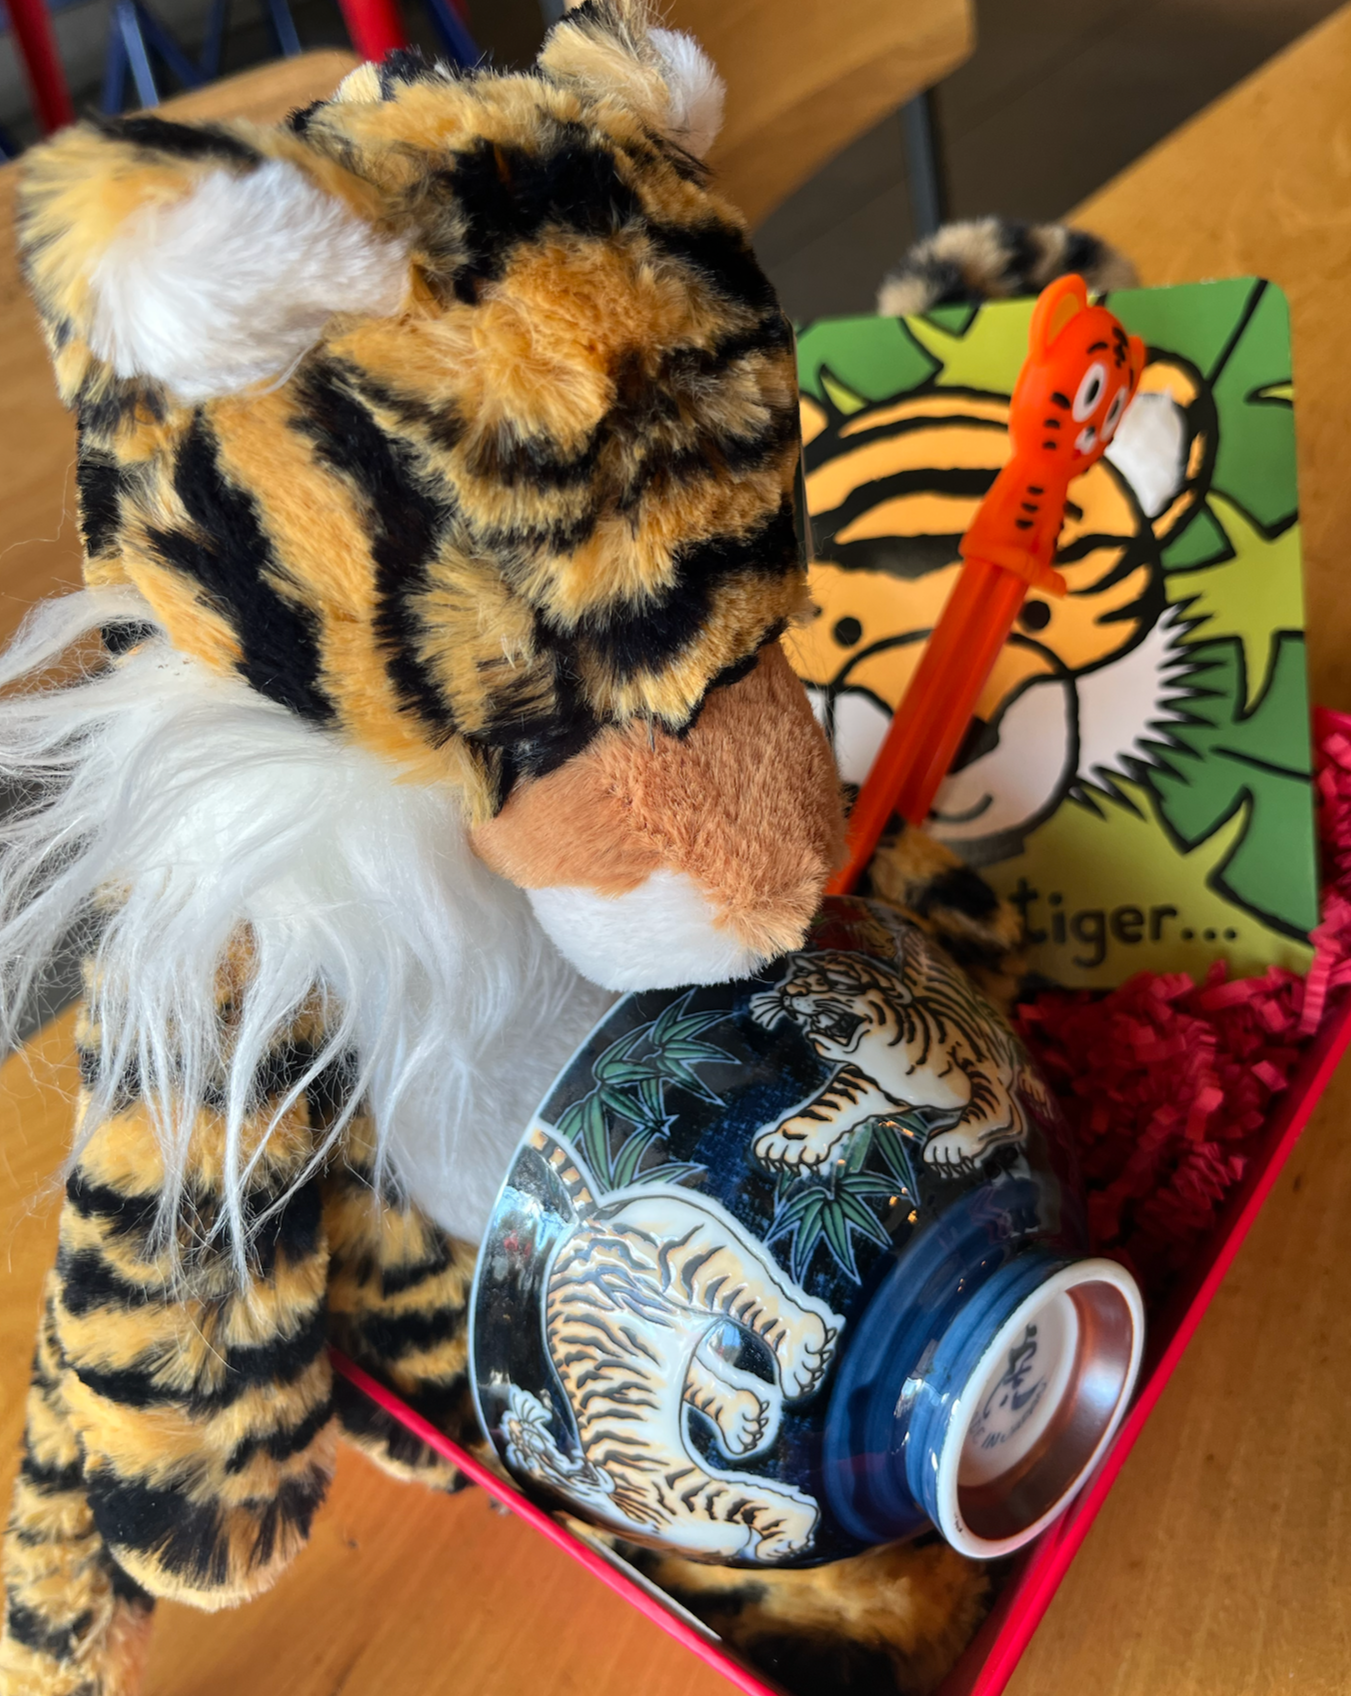 The Majestic Tiger Activity Gift Set